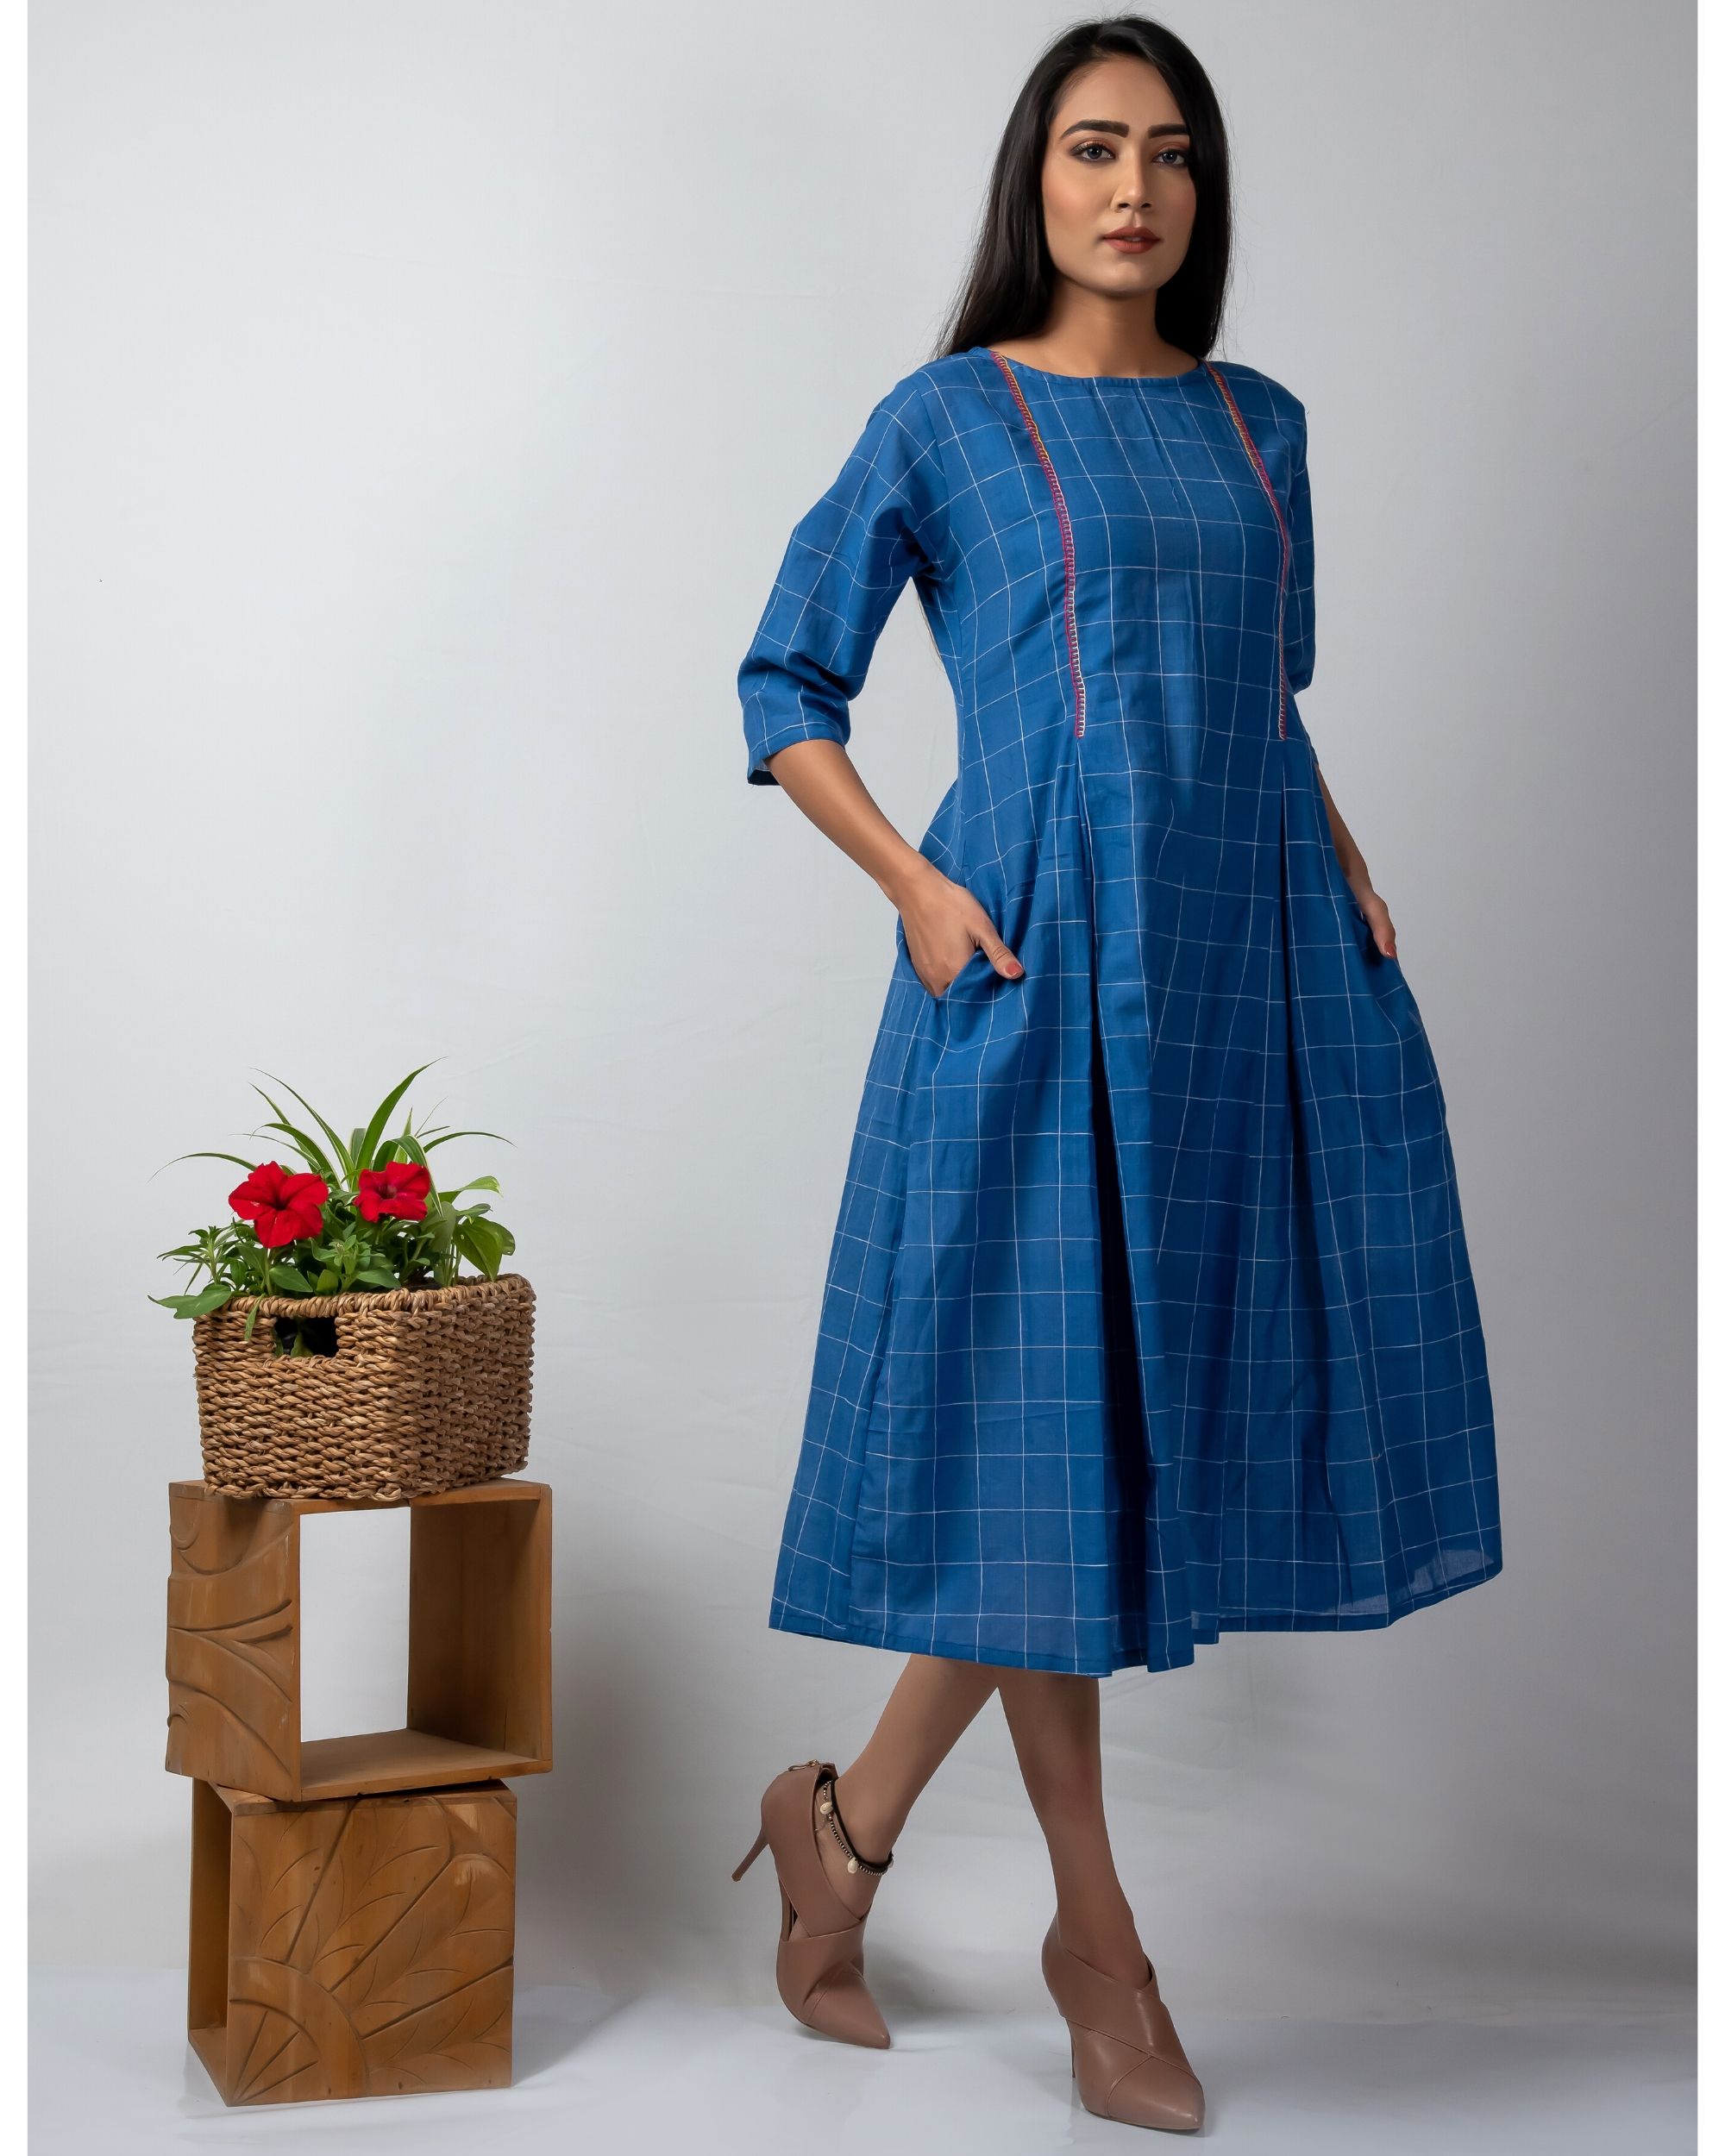 Blue checkered dress with embroidery by Silai | The Secret Label